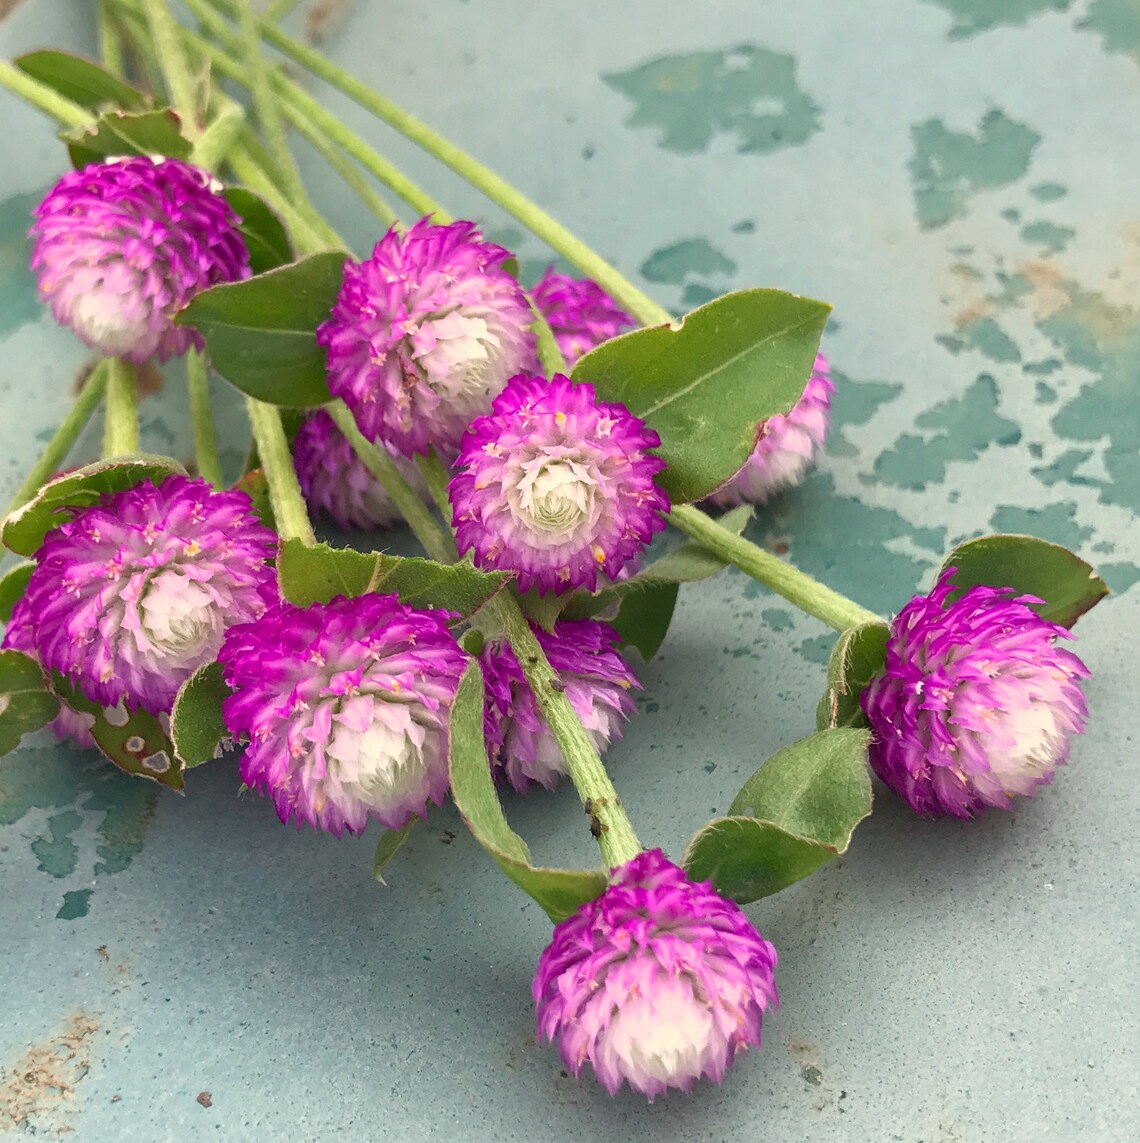 Audray Mix Gomphrena Seeds, Mixed Colors of Globe Amaranth, Great for Fresh or Dried Florals